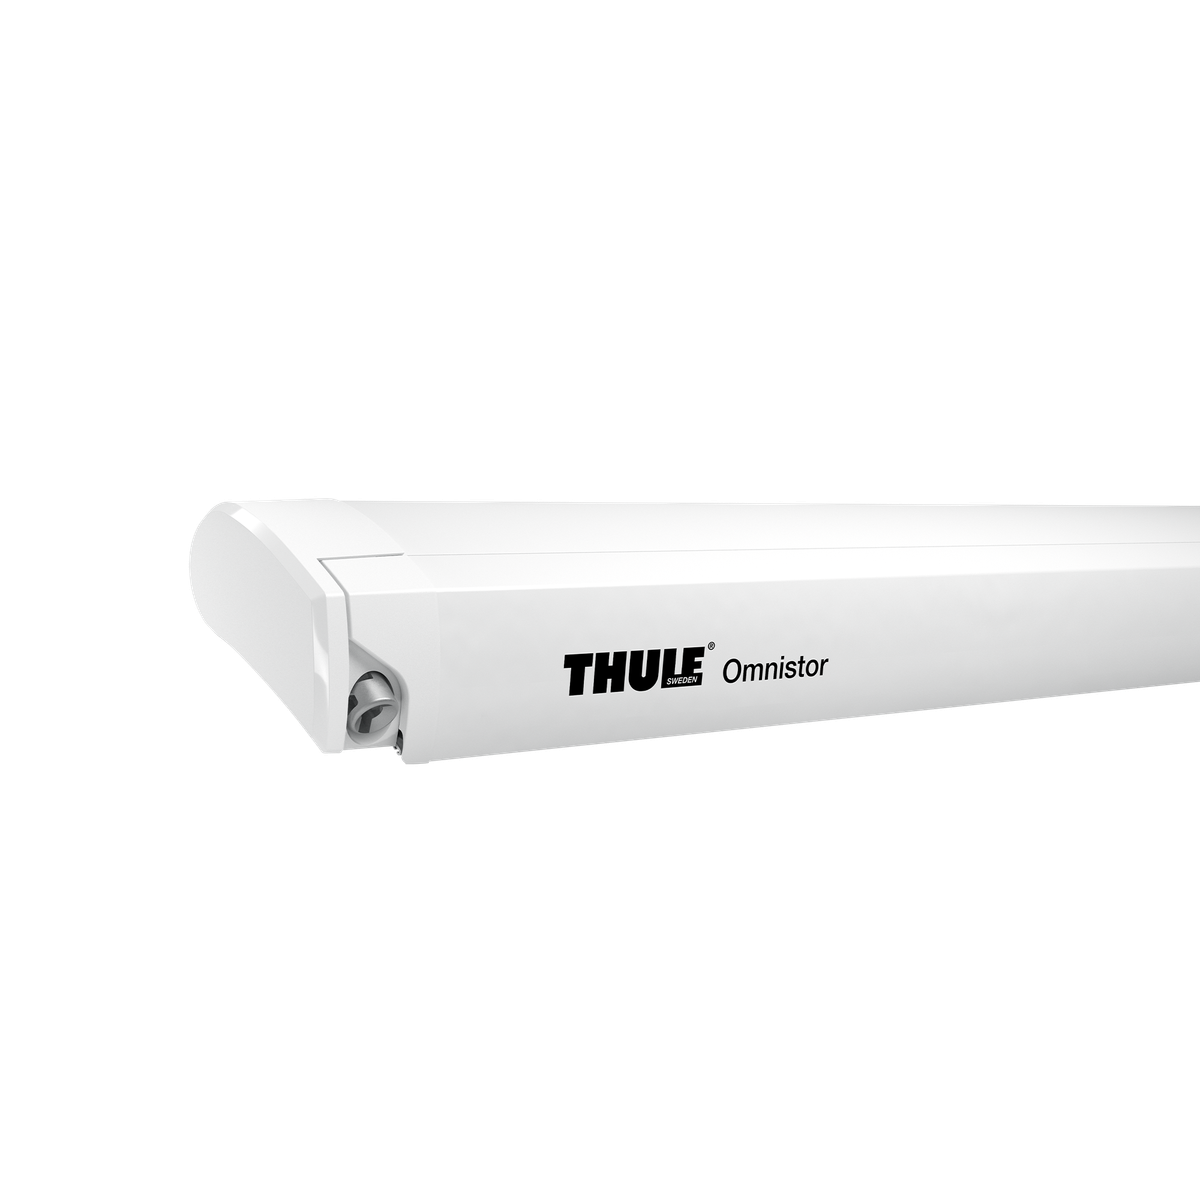 Thule Omnistor 9200 roof awning 6.00x3.00m white